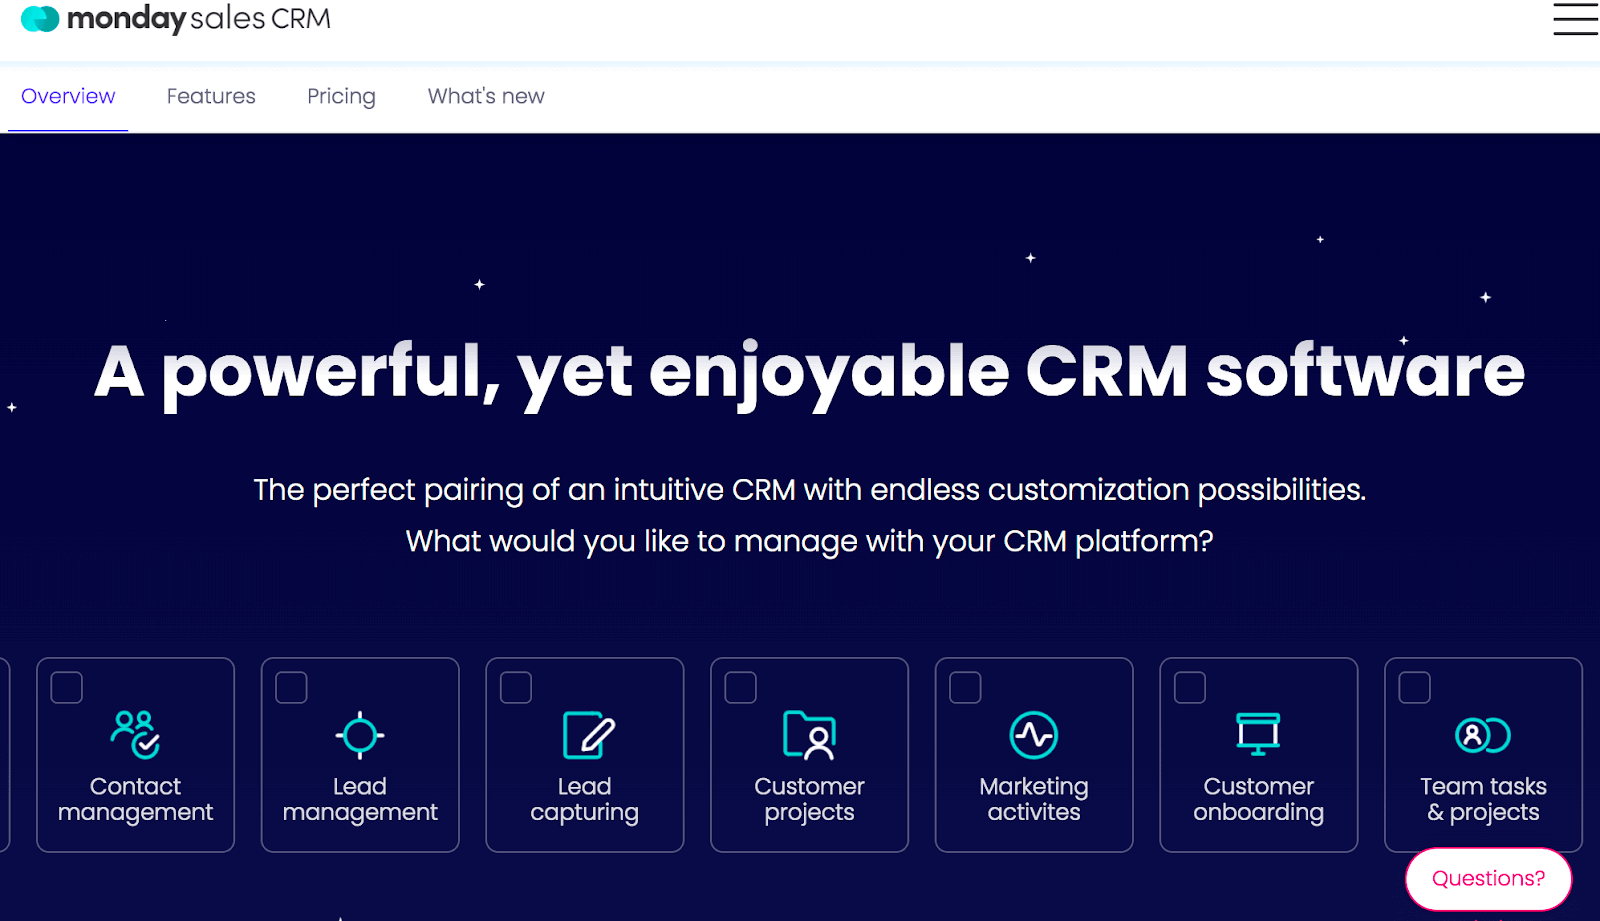 monday.com's CRM system integrates with the company's other solutions and is a part of its Monday Work OS